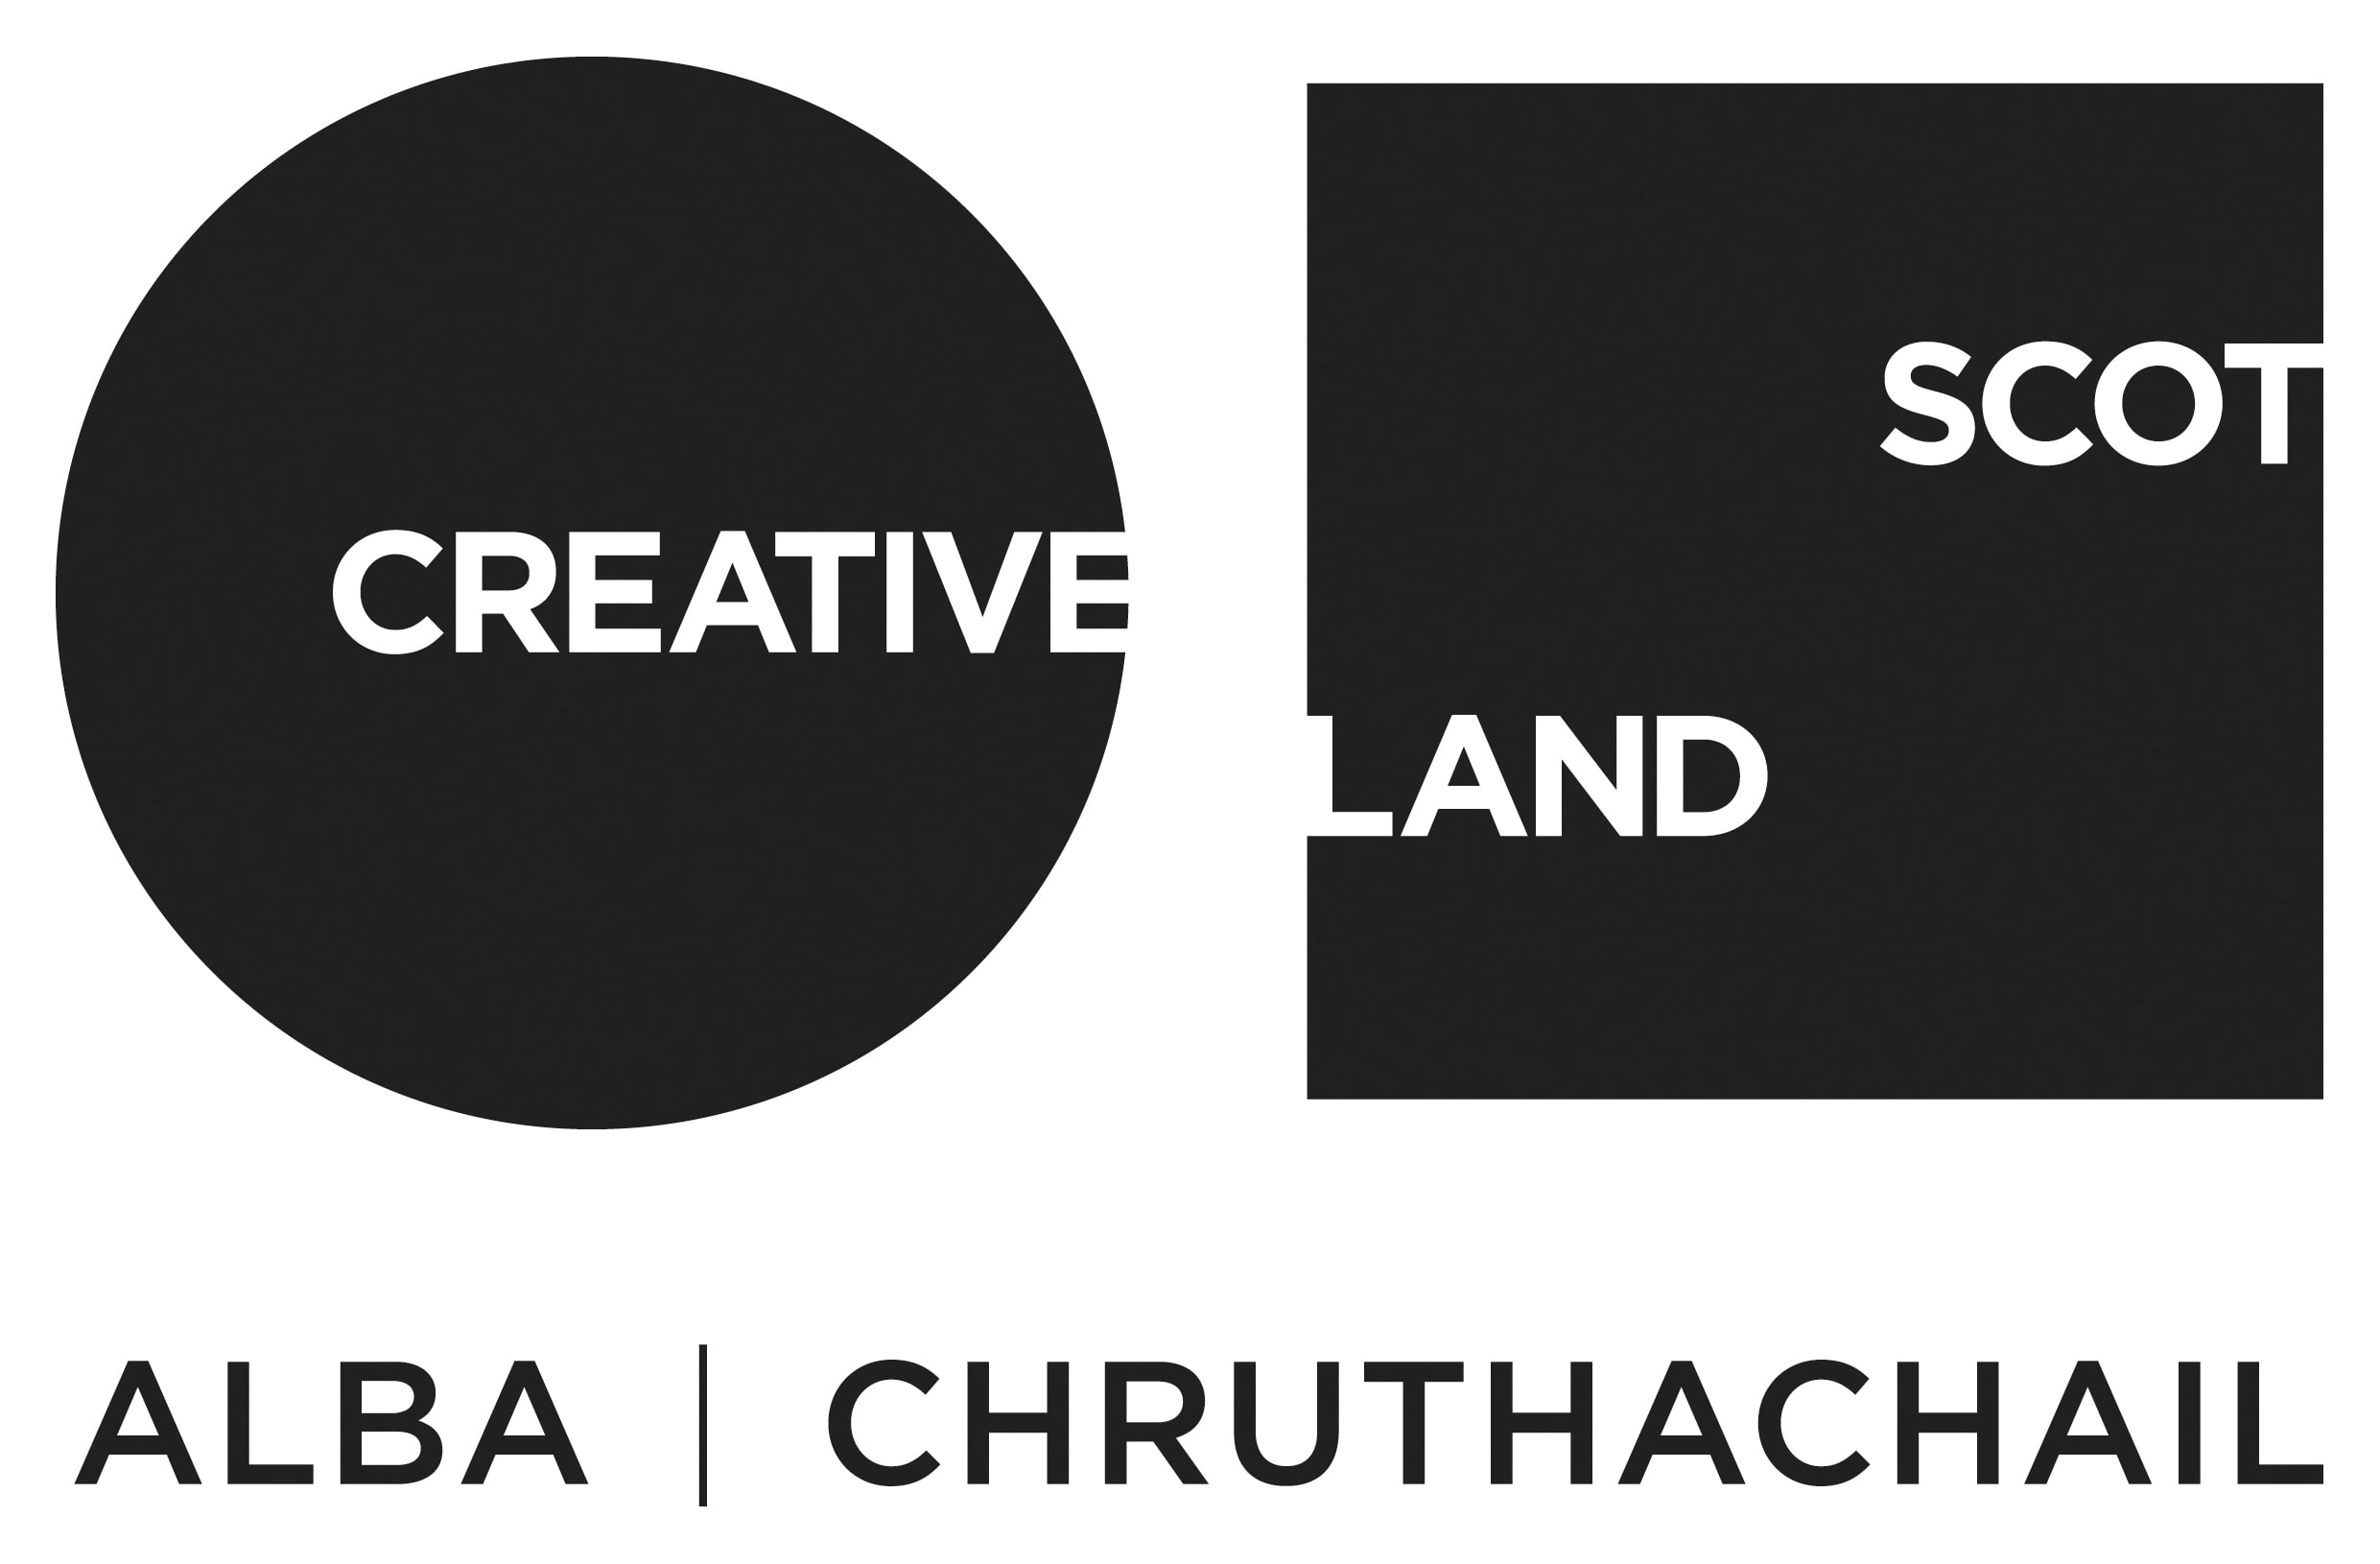 Logo consisting of black circle and square with Creative Scotand in white writing and the gaelic translation underneath in black Alba Chruthacachail